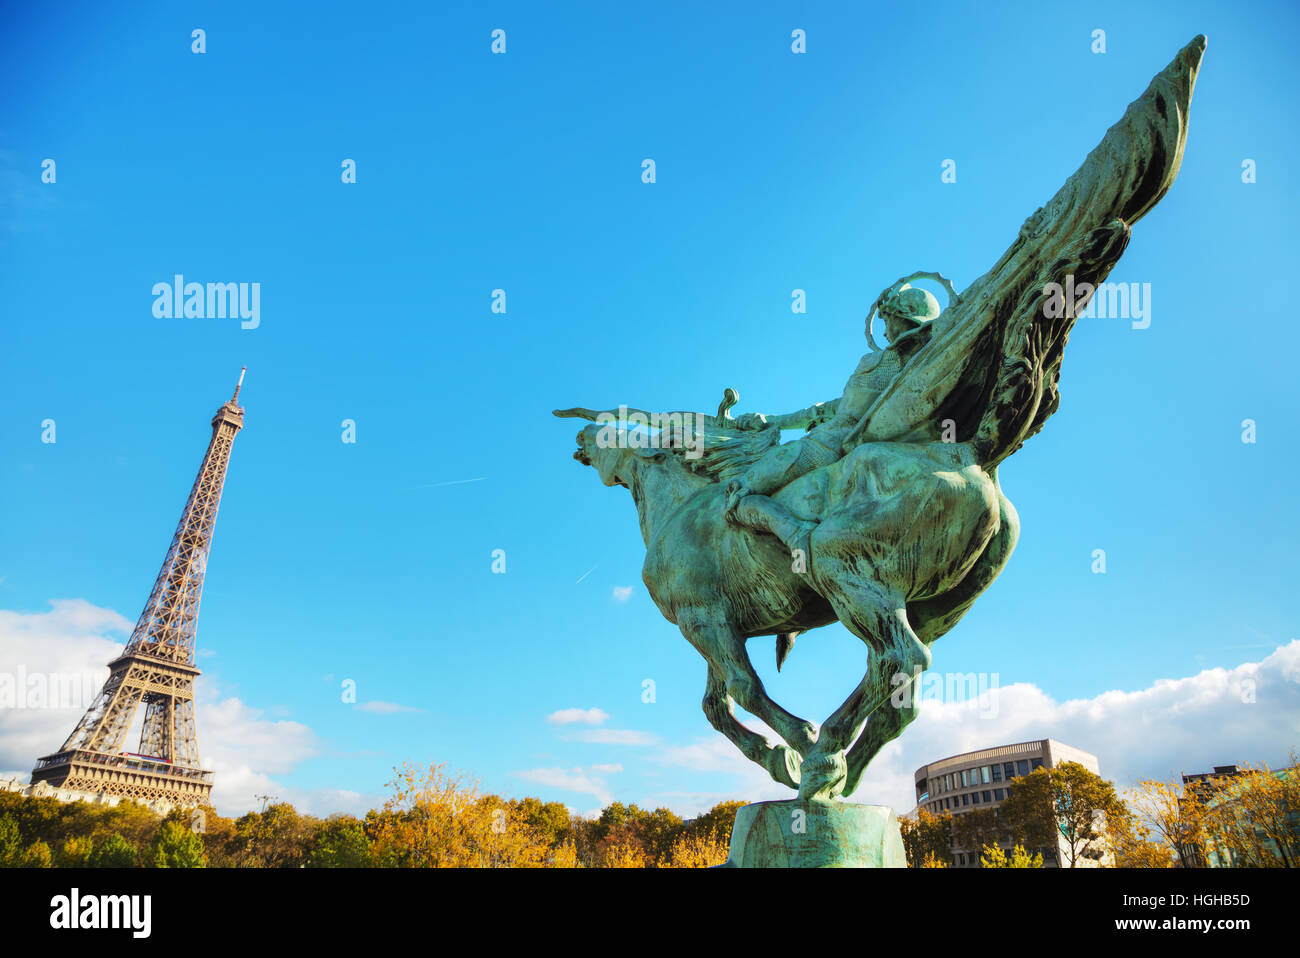 Cityscape with the Eiffel tower in Paris, France Stock Photo